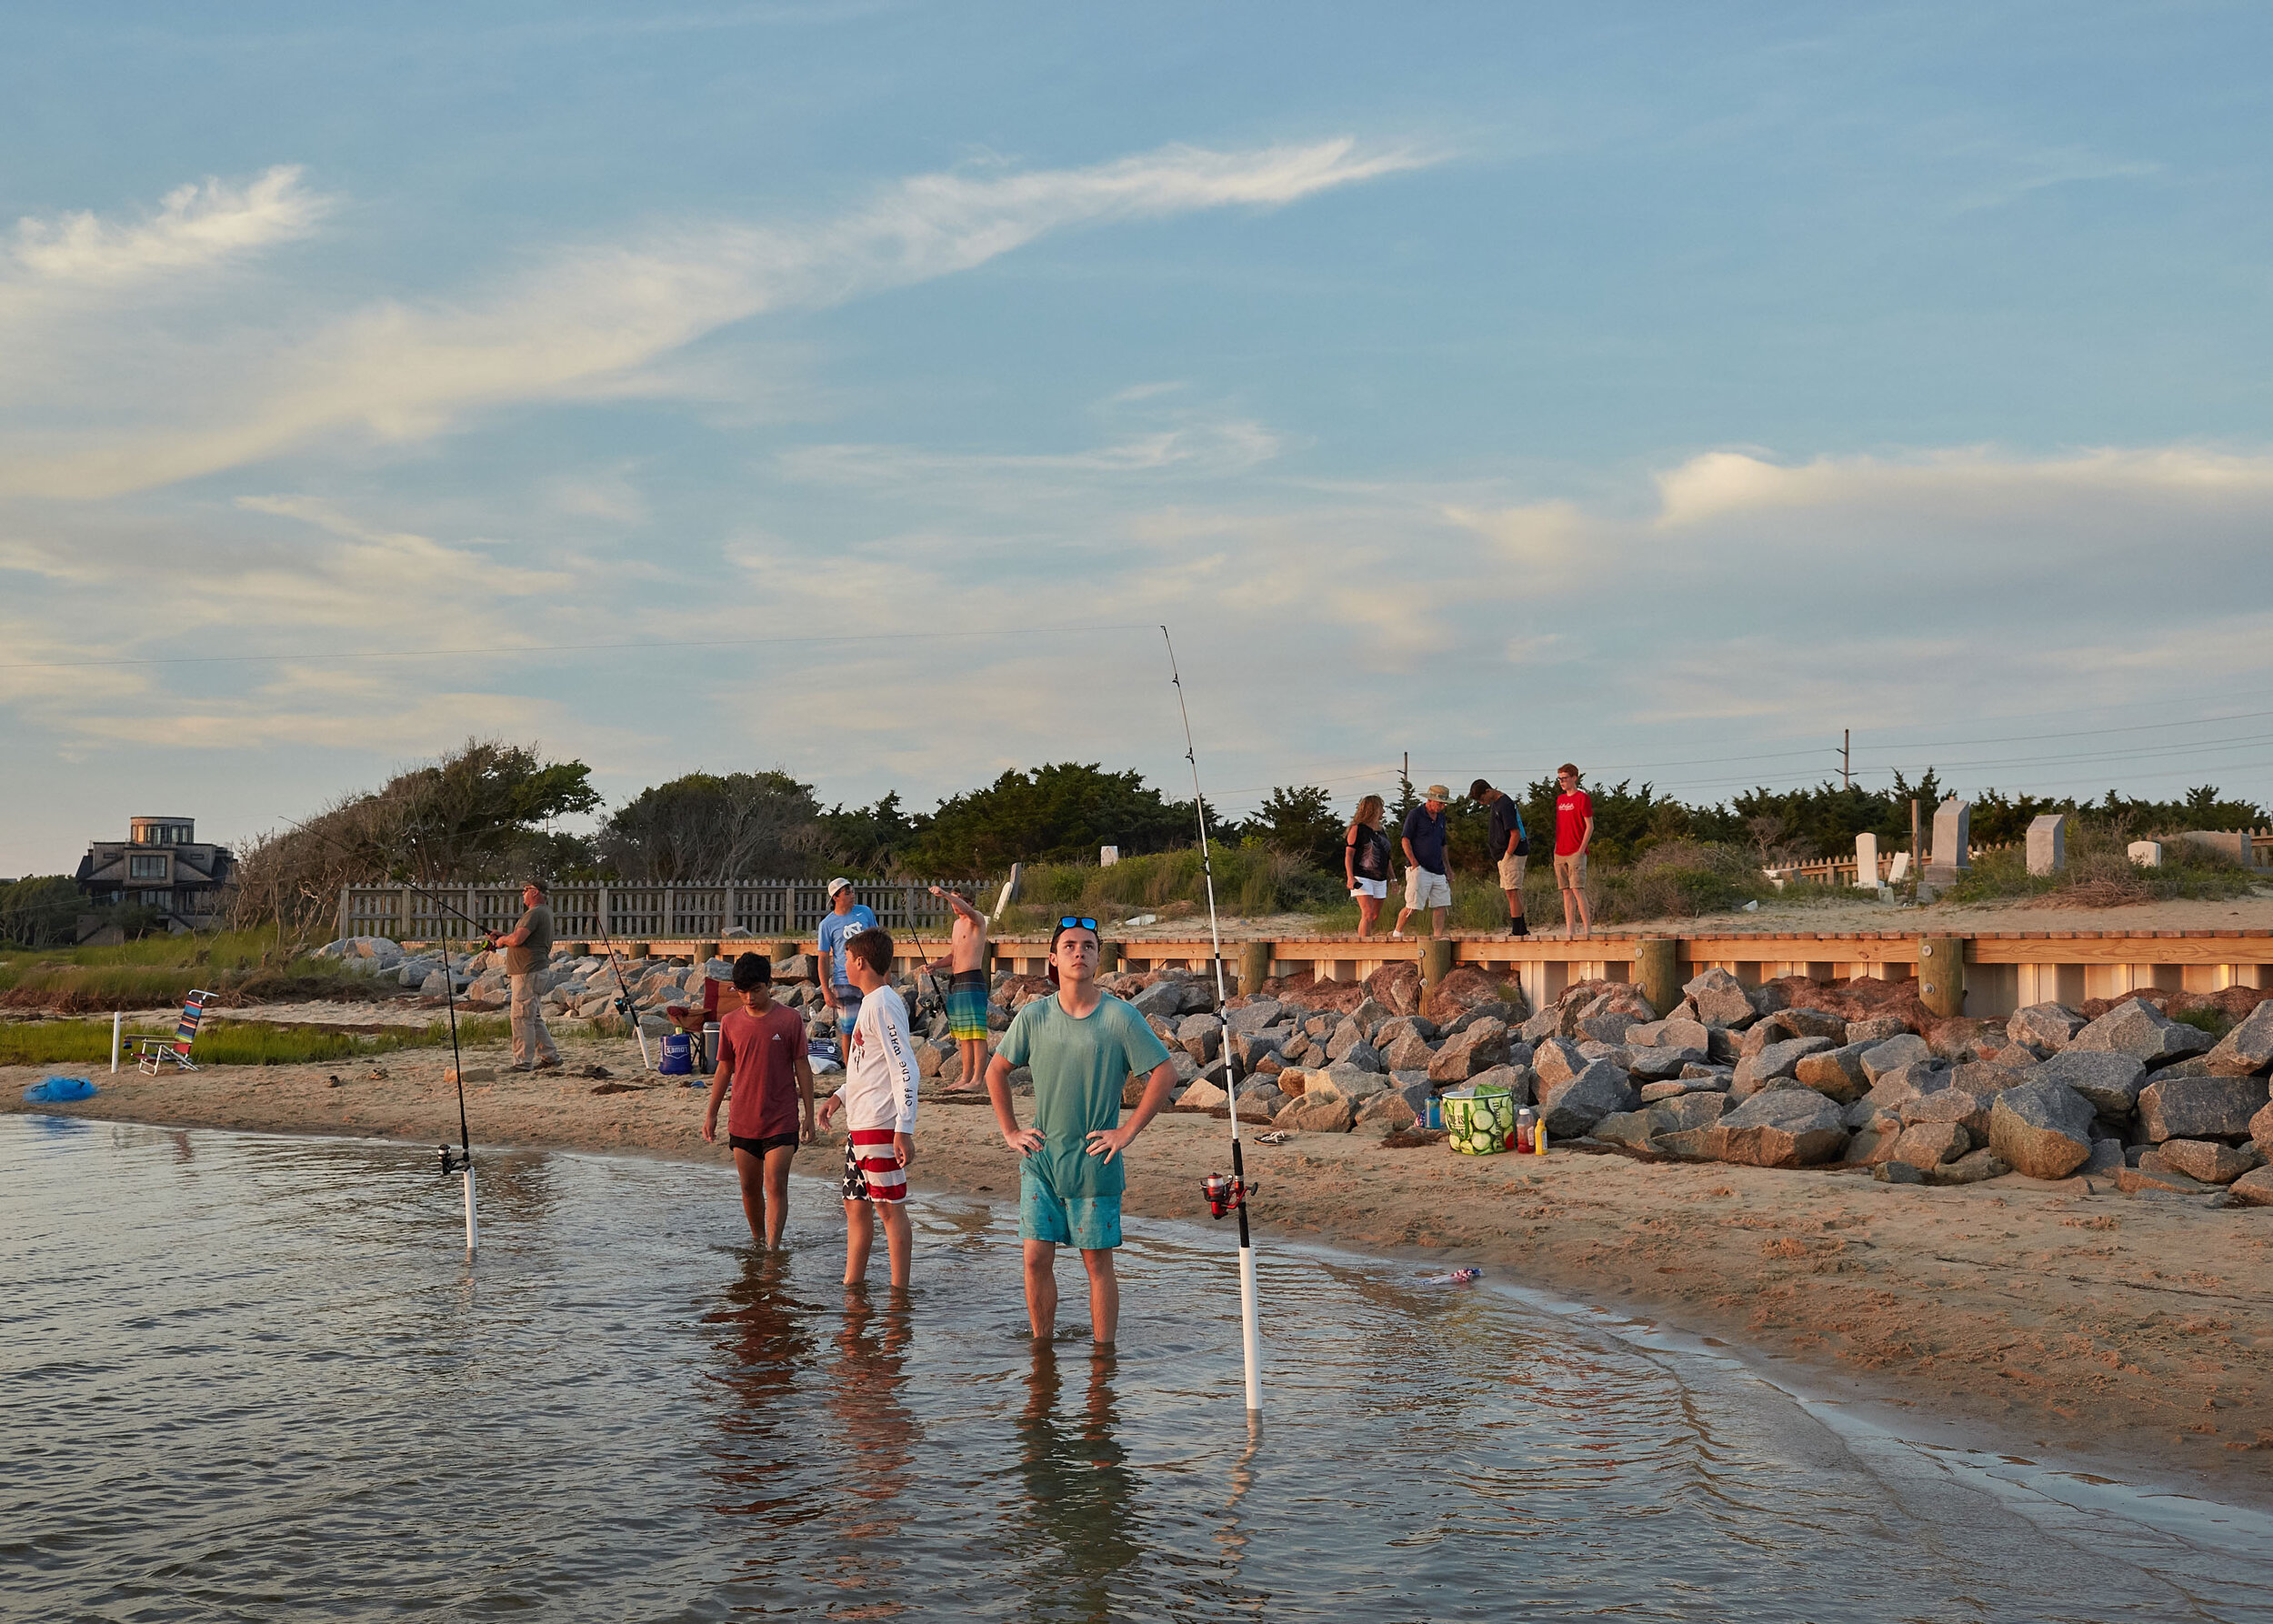  Tourists enjoy the sunset and the newly completed bulkhead at the Salvo Community Cemetery in May 2019. Dare County won a grant for $162,000 from funds left over from Hurricane Matthew emergency relief bill. Around 6pm on summer evenings, the Salvo 